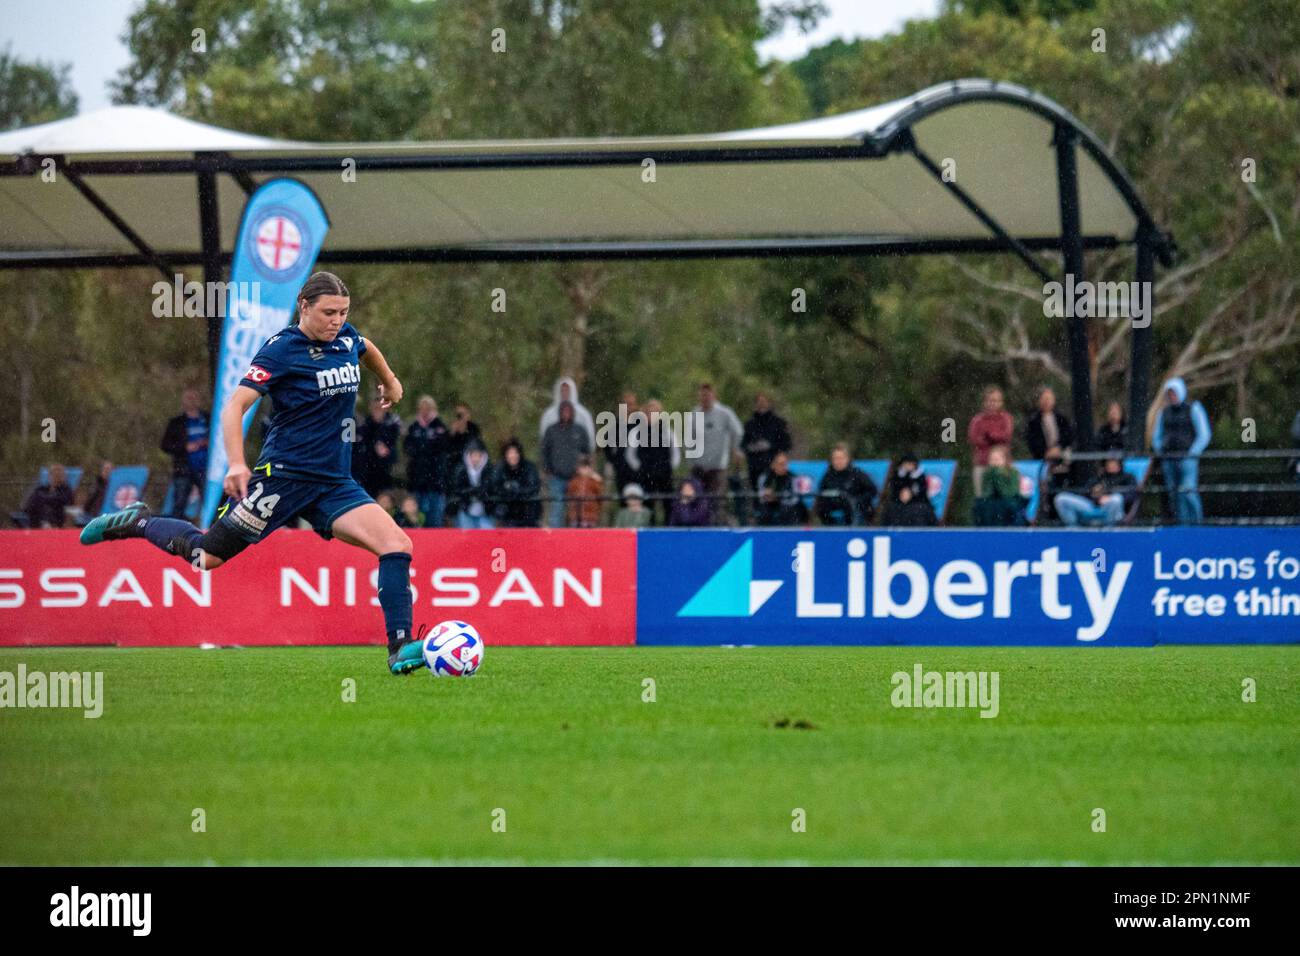 Cranbourne East, Australia. 15 April 2023. Melbourne Victory's Melina Ayres (#14) takes a penalty kick to bring Melbourne Victory level during the elimination final. Credit: James Forrester/Alamy Live News Stock Photo